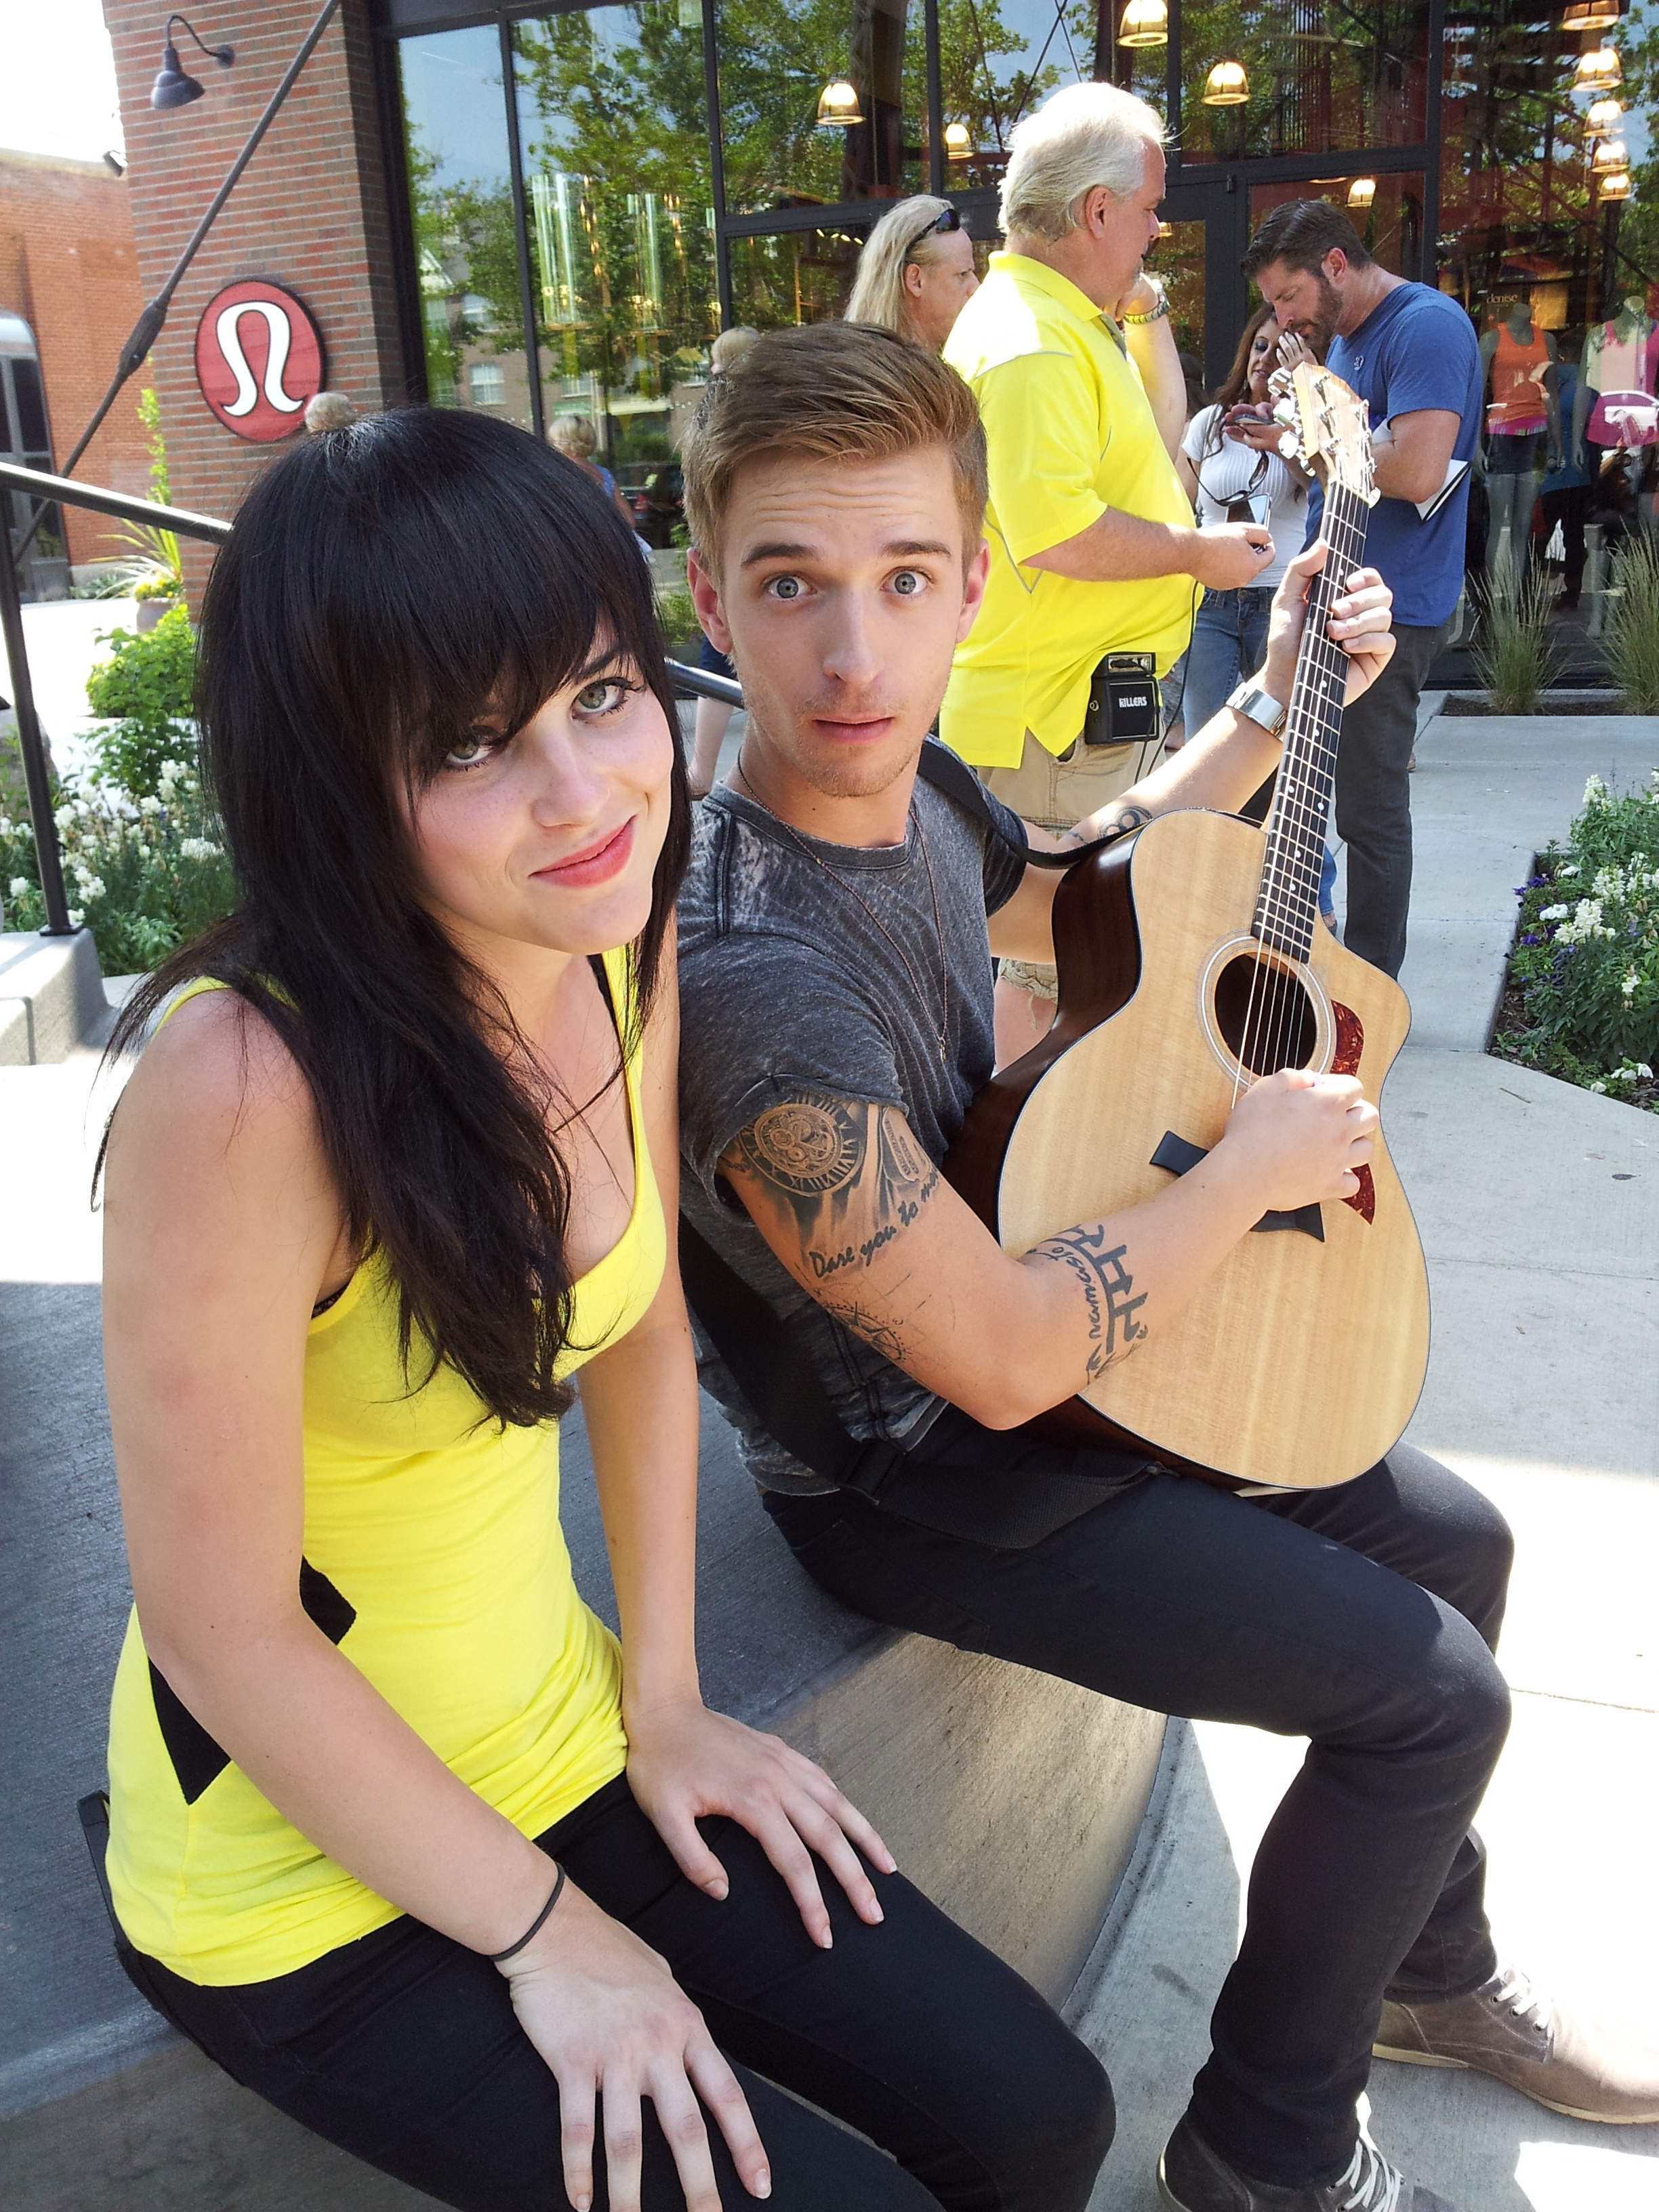 Brogan Kelby and Keshia James on His NEW Music Video 'This Is Your Life' Trolley Square, UT 7.5.2013 'Adorable'